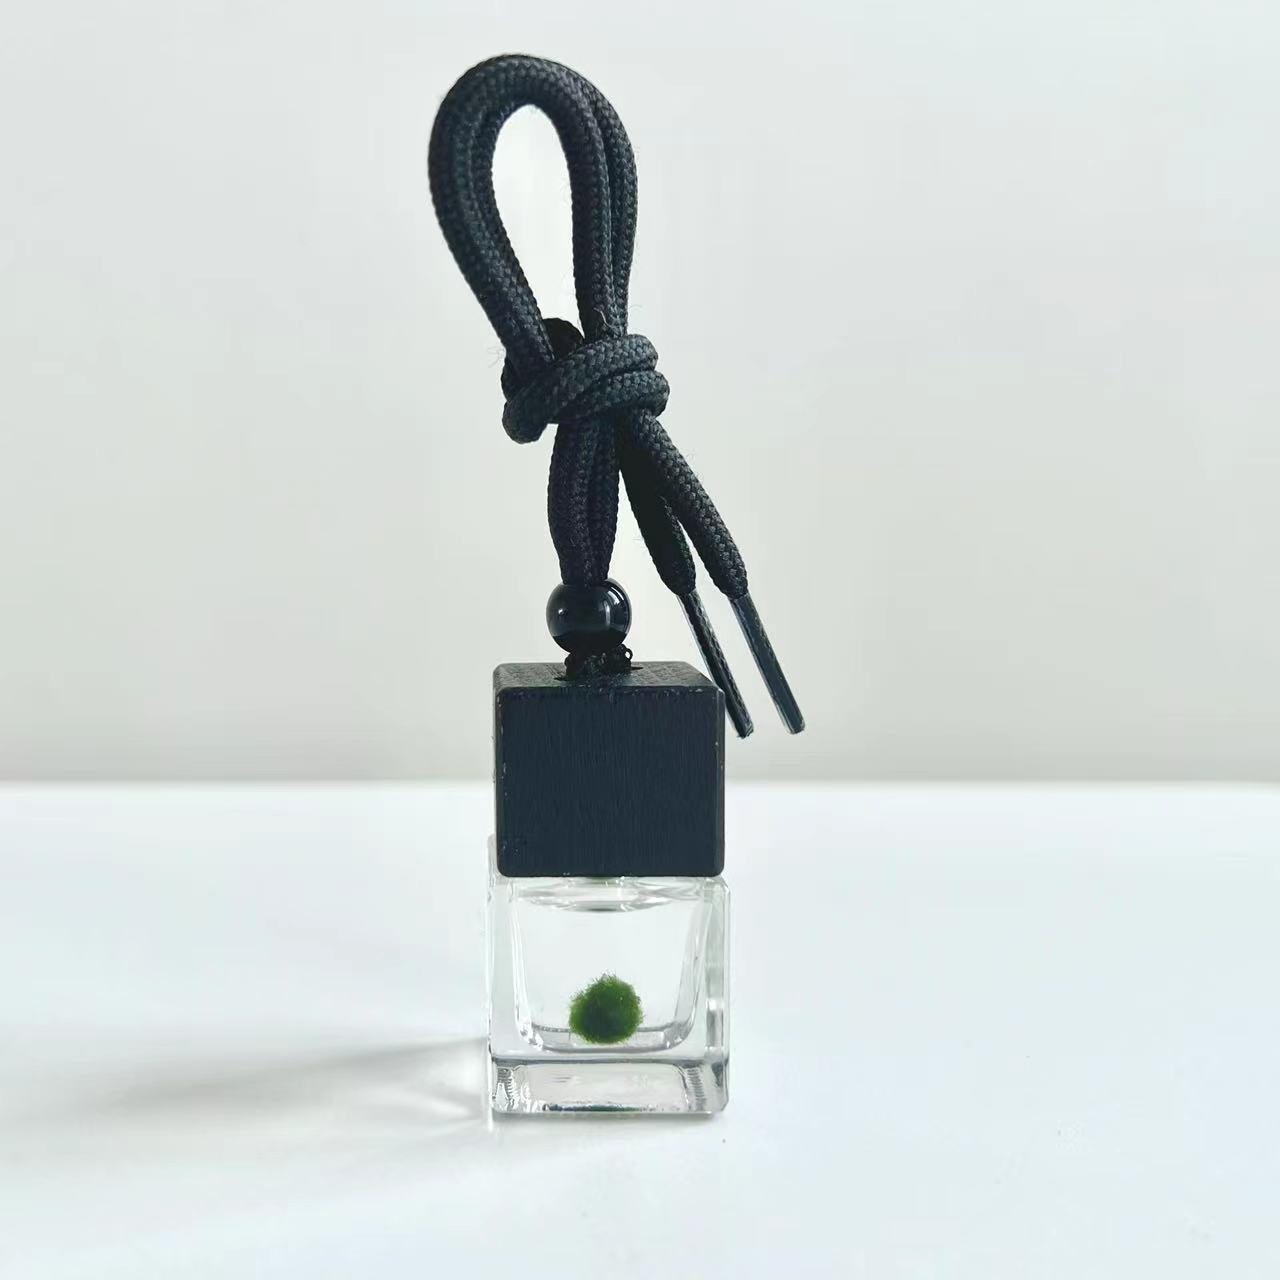 Mini Baby Marimo Moss BallSpecification:
Marimo Live Moss Ball * 1
Glass Bottle * 1
Name Card * 1
Simple Care Instruction * 1 - daily use
Fresh-arrival Care Instruction * 1 

Perfect gift for